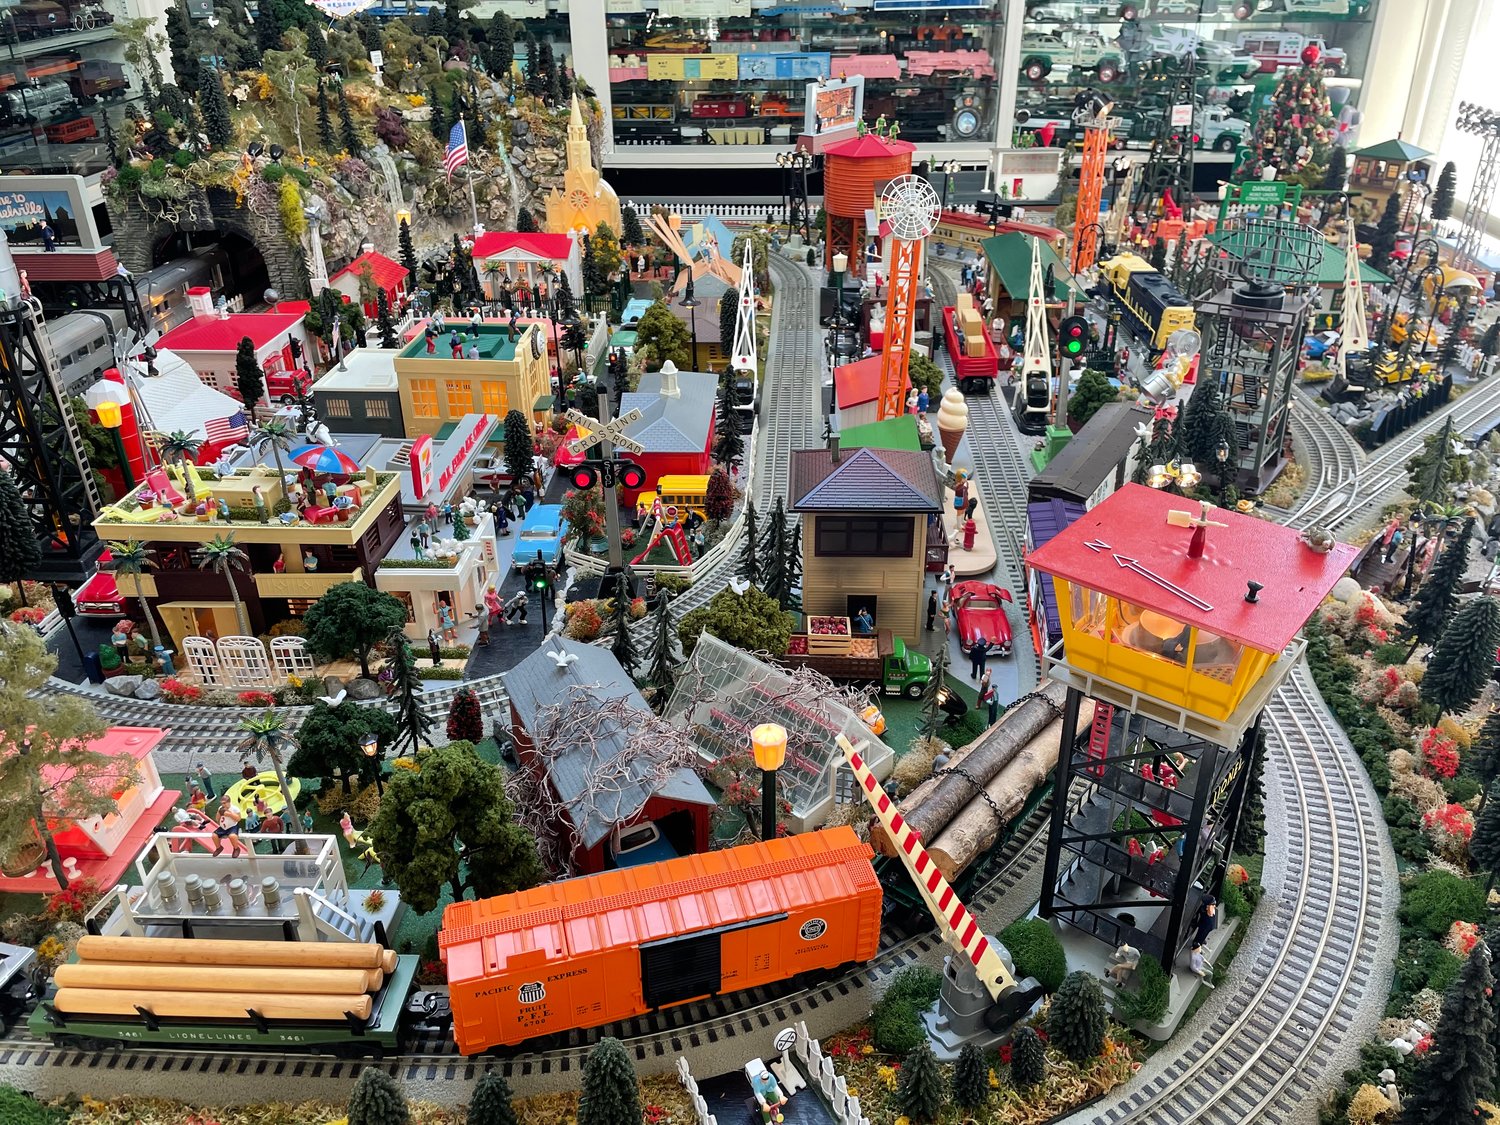 Bellmore resident Gary Gaccione nearly died in 2020, after a long battle with Covid-19. In his recovery at home, he connected with friends from the past and present, and created an impressive Lionel model train display.